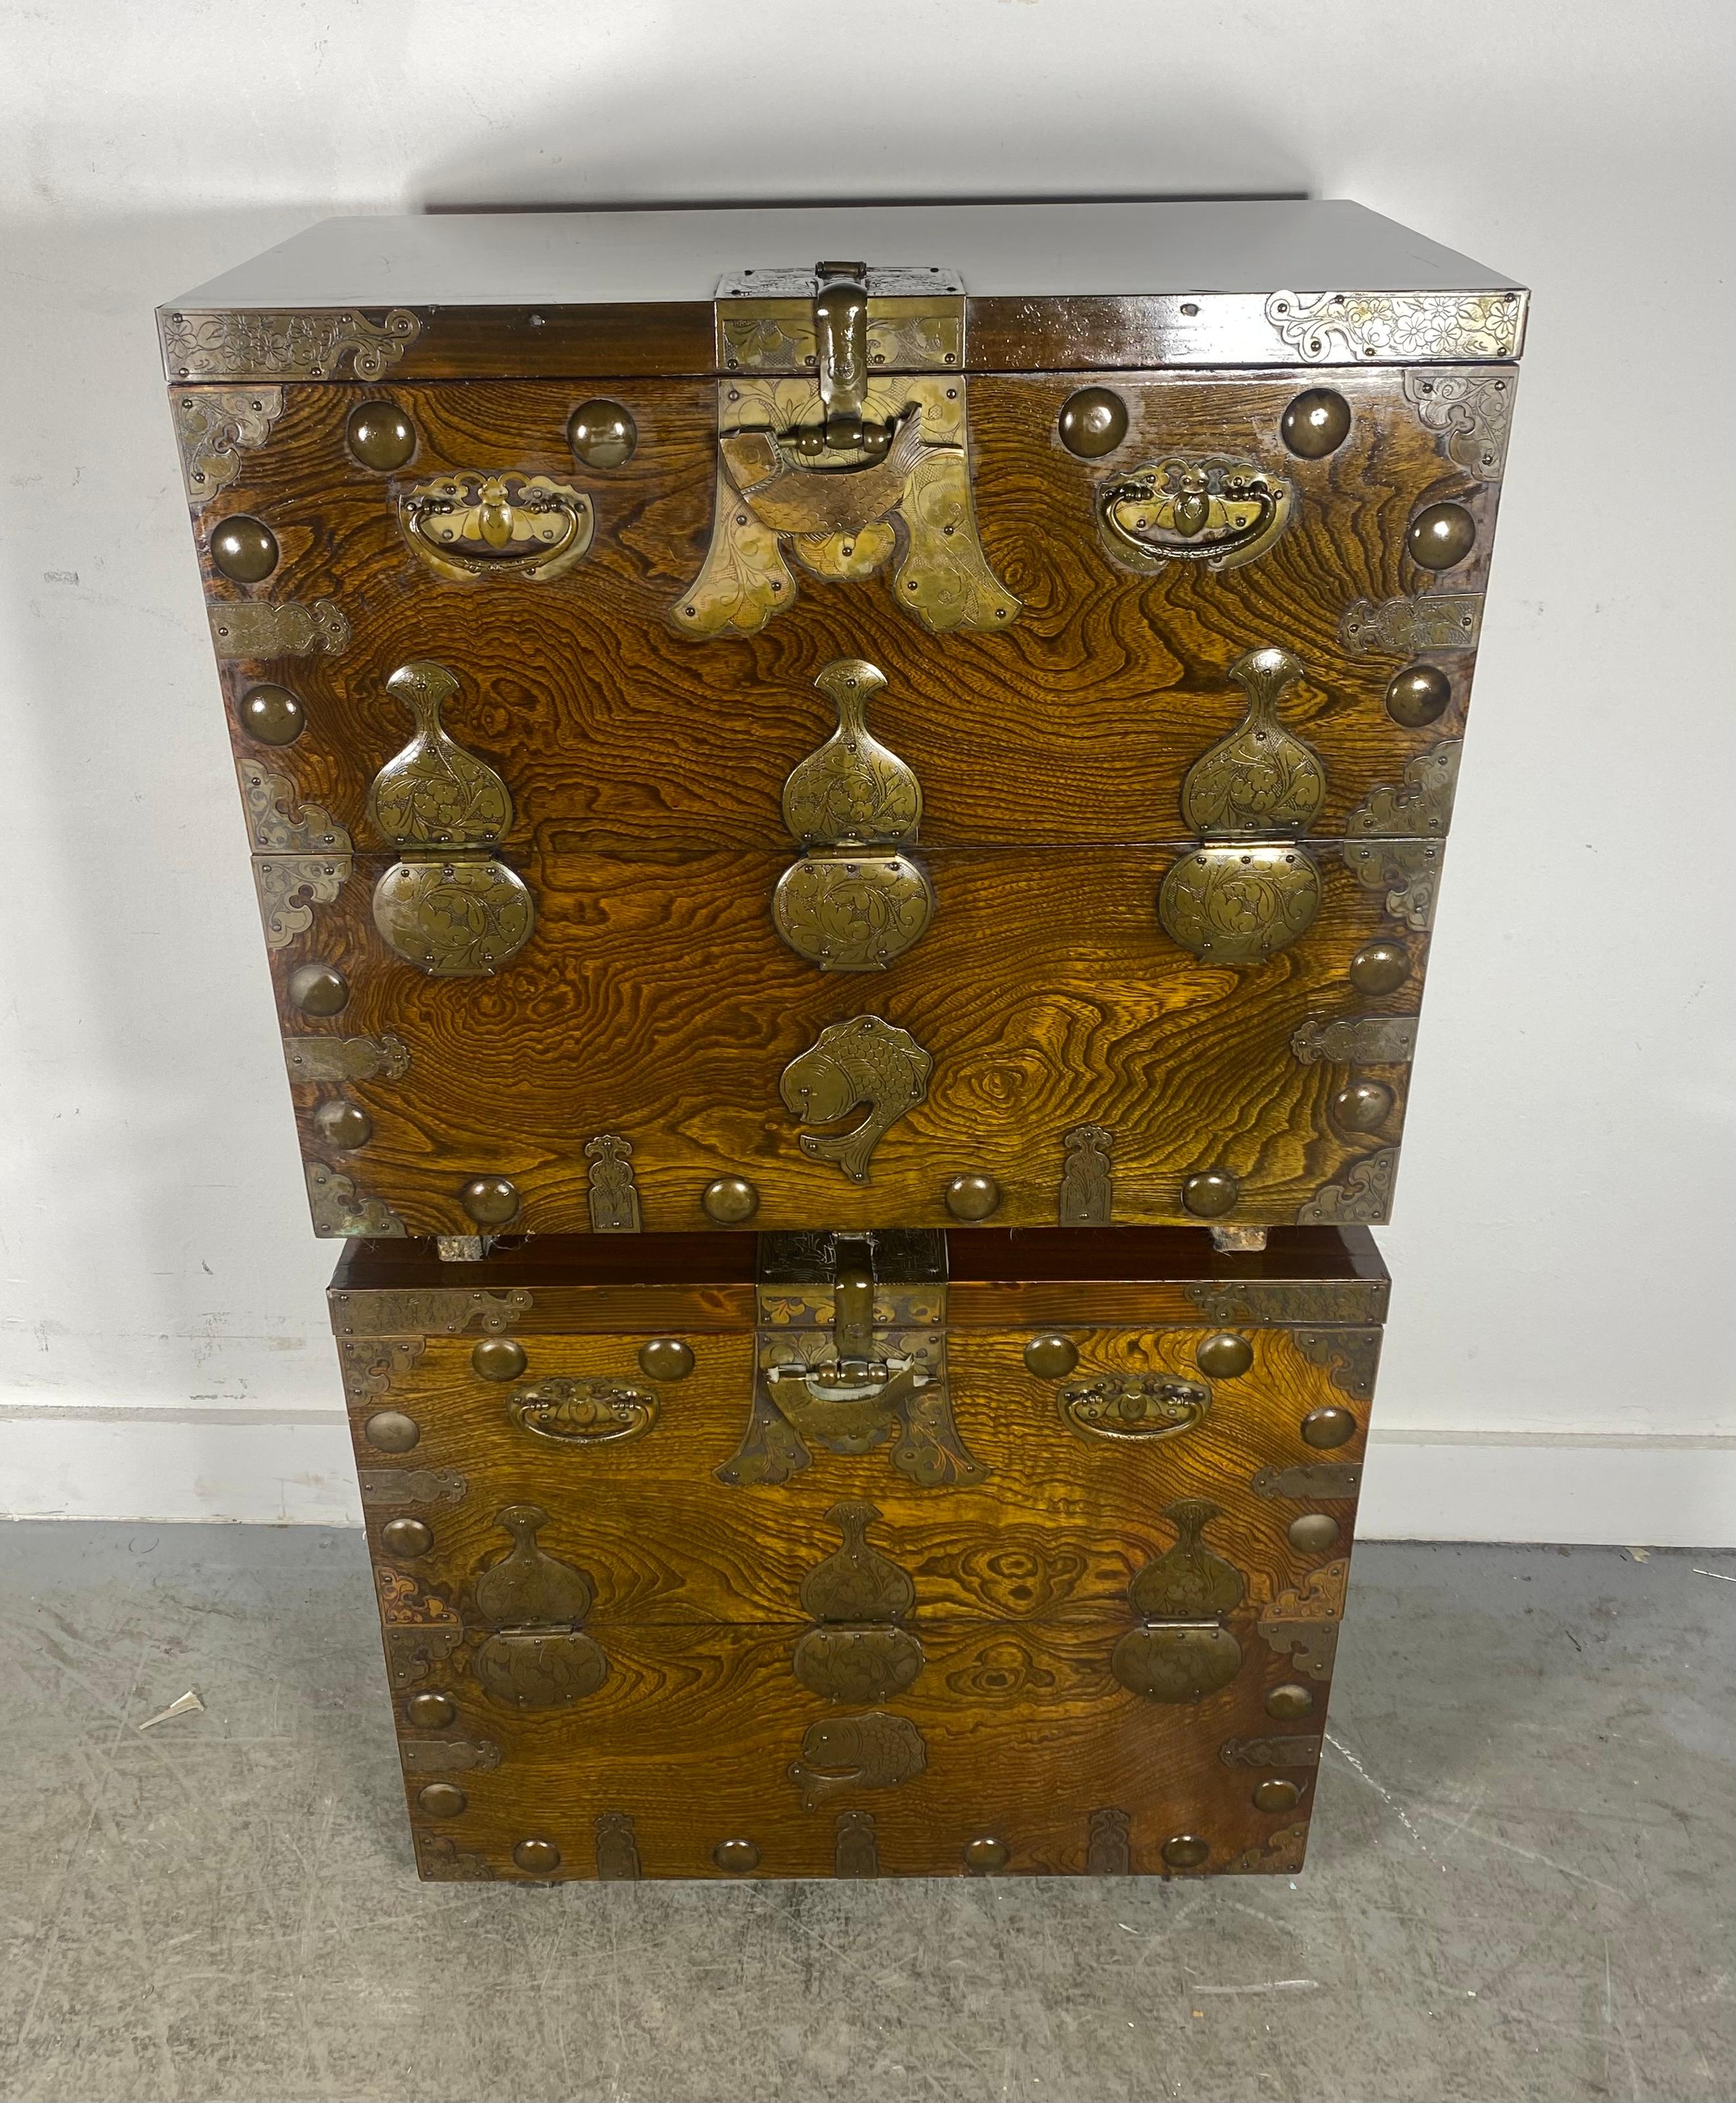  Korean Wedding Bandaji Chest Joseon Dynasty style.A Korean Bandaji chest circa late early to mid 20th century of Joseon Dynasty. Known as drop front half opening chest, Bandaji was traditionally used to store household valuables and beddings,,,,On